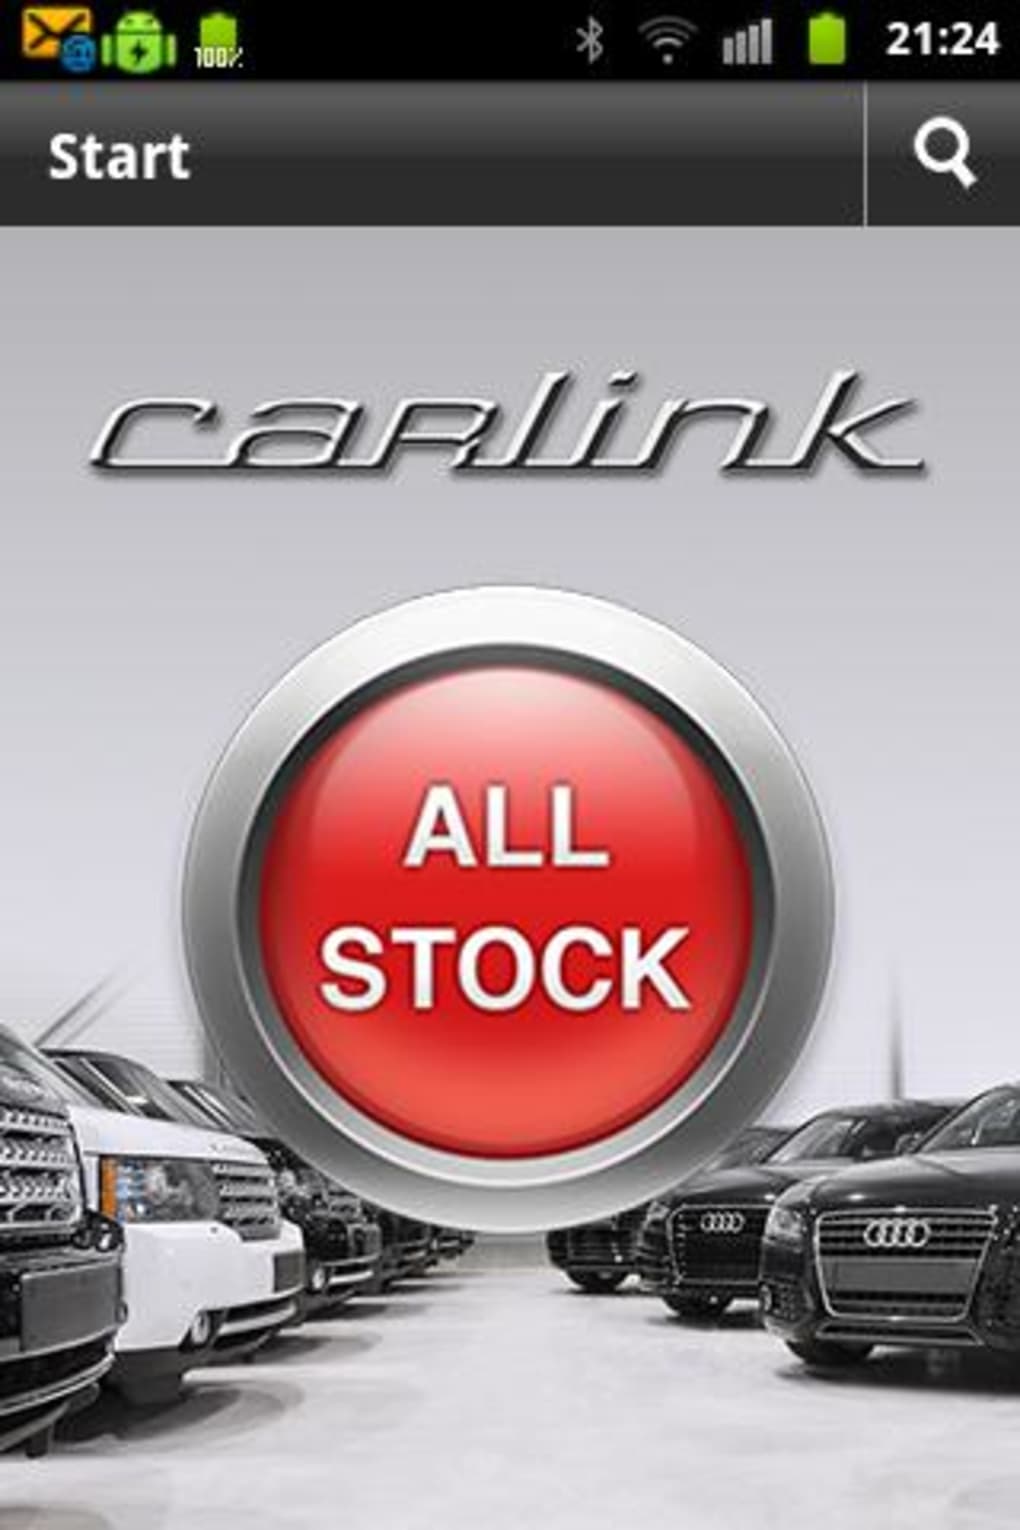 Carlink APK for Android - Download